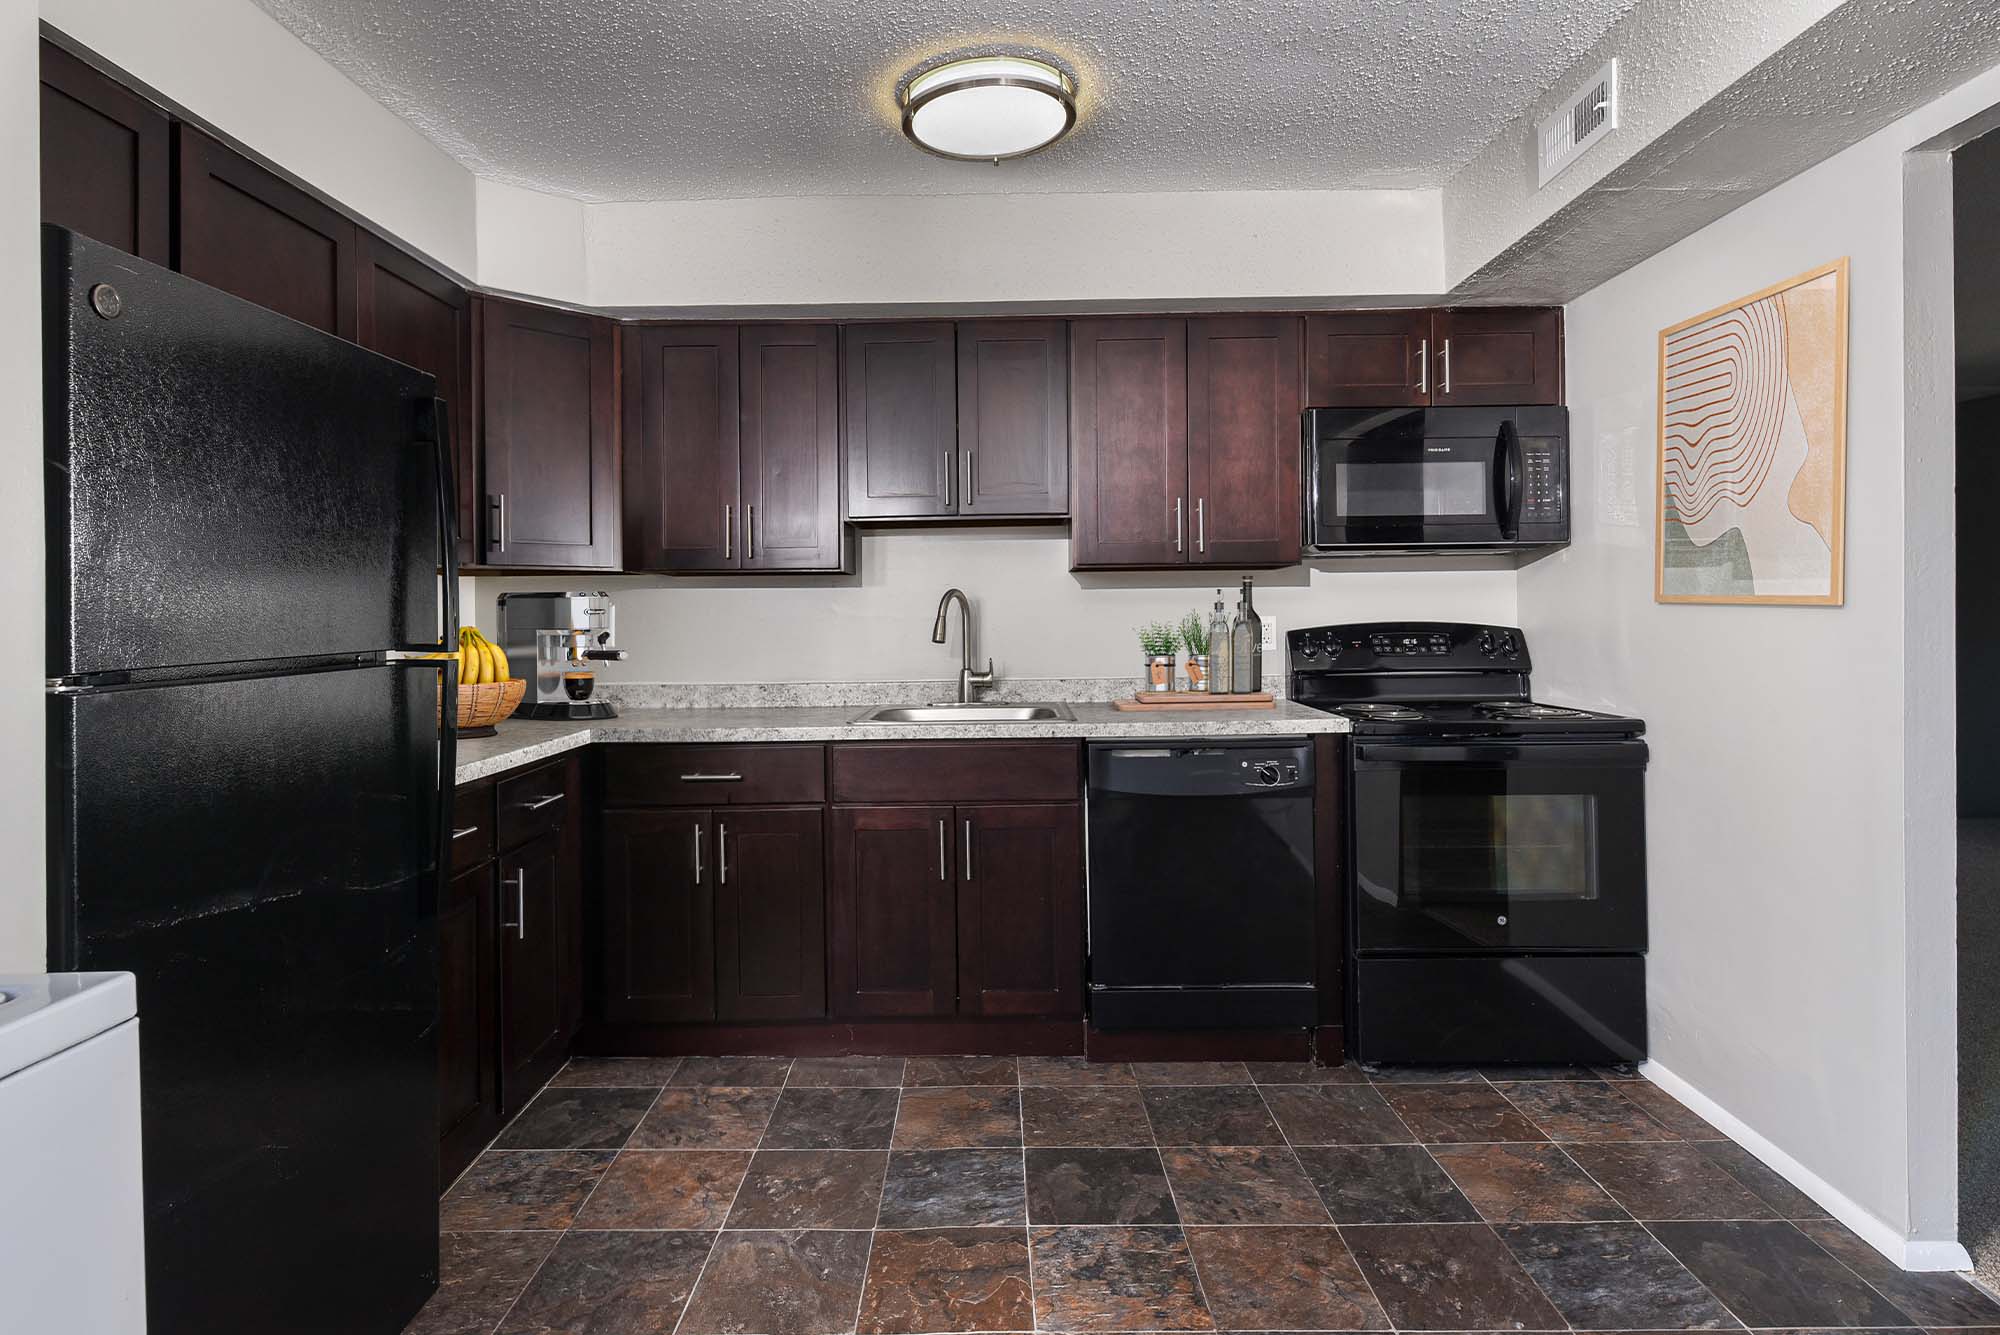 Updated kitchens at The Commons in Bensalem, Pennsylvania